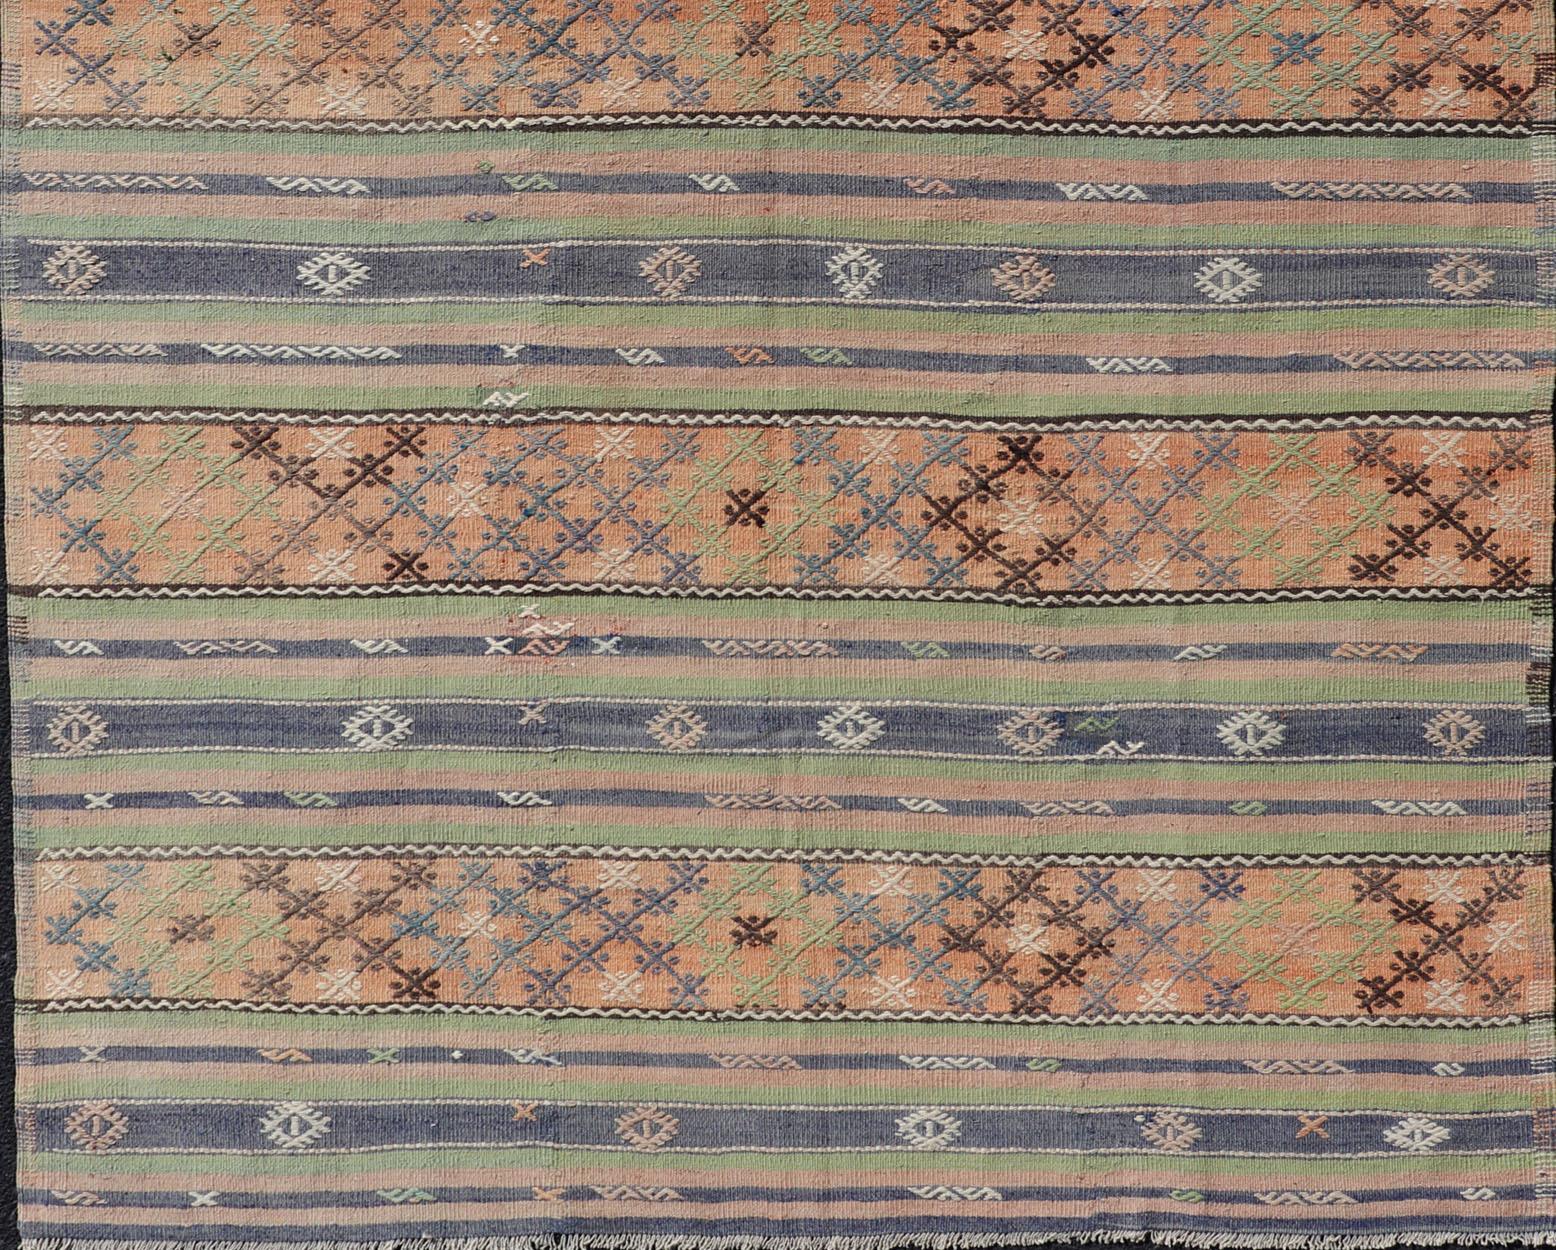 Colorful Turkish Kilim with Stripes and Geometric Elements in Orange and Green In Good Condition For Sale In Atlanta, GA